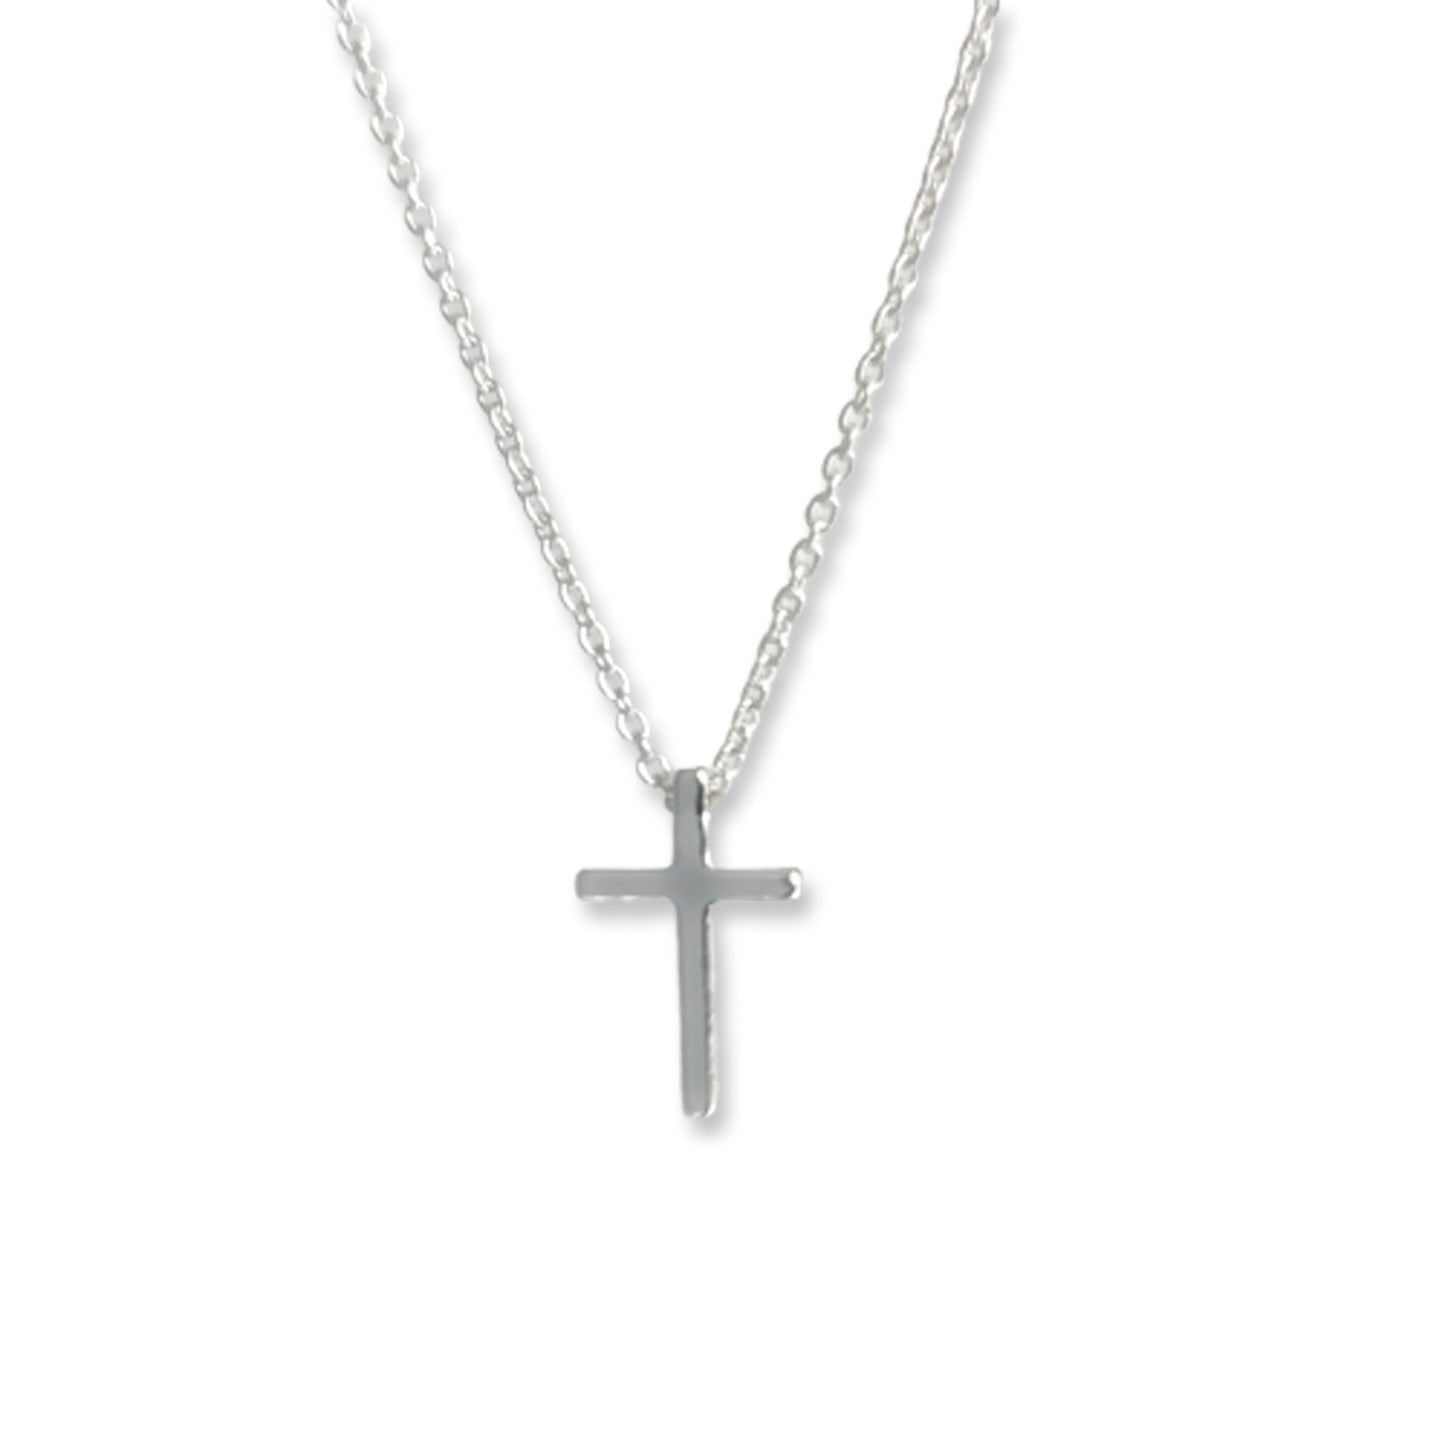 Tiny Cross Necklace - Sterling Silver